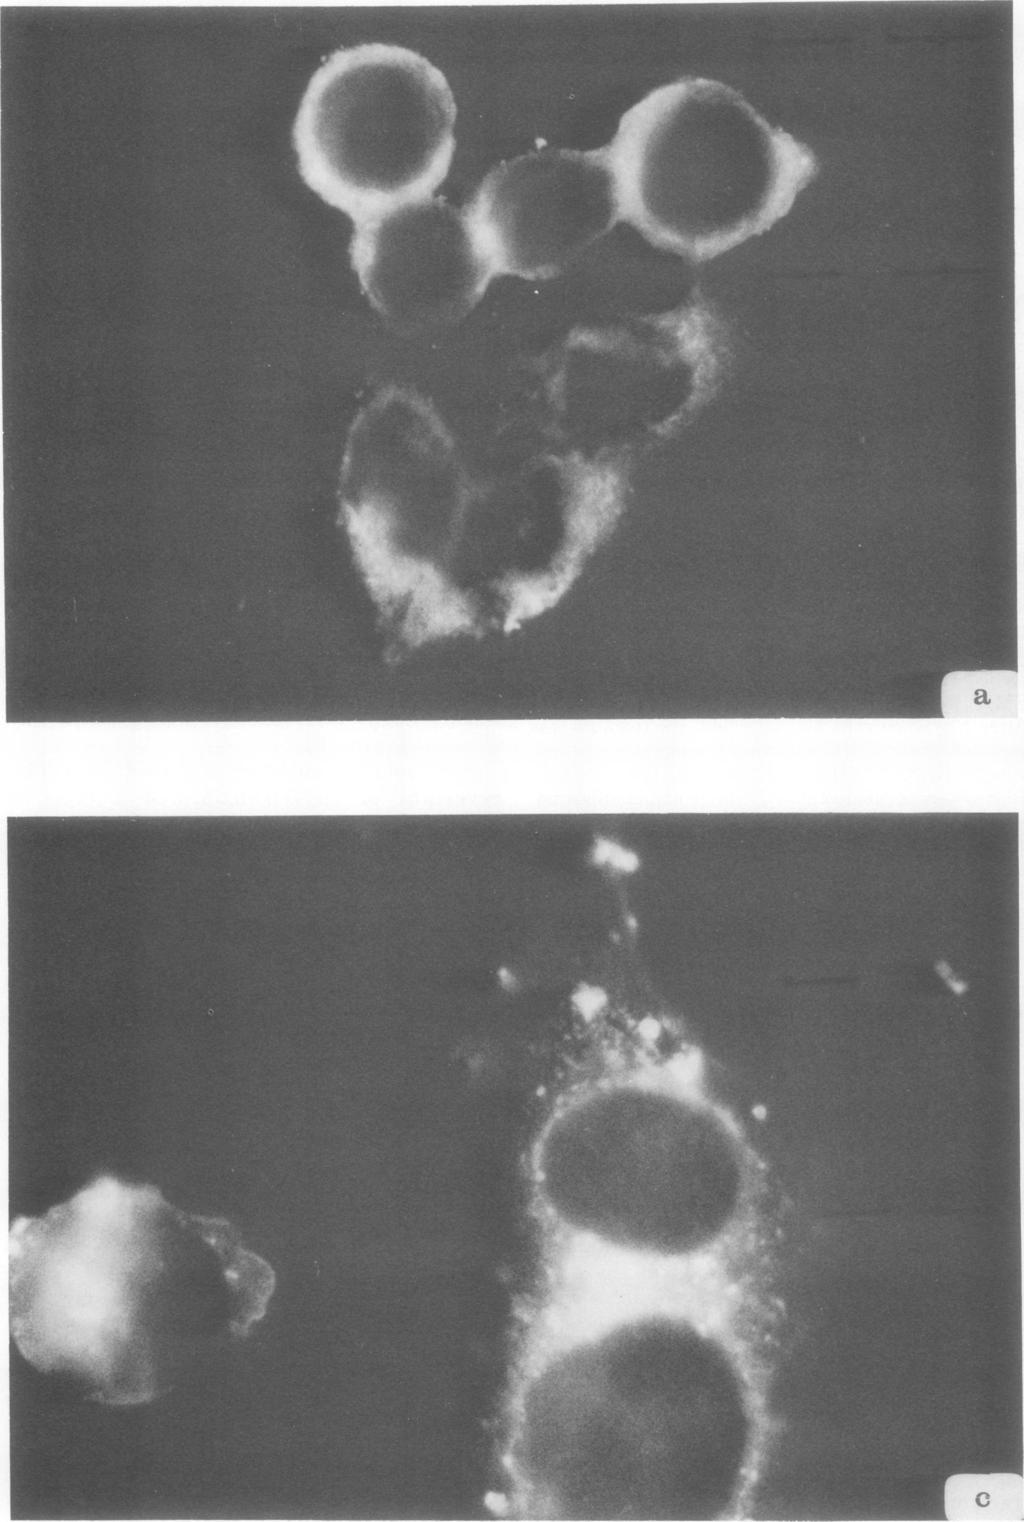 k FIG. 1. Indirect immunofluorescence test: (a) and (c) are HSV-1-transformed L and HeLa cells, respectively, stained with lytic antiserum.